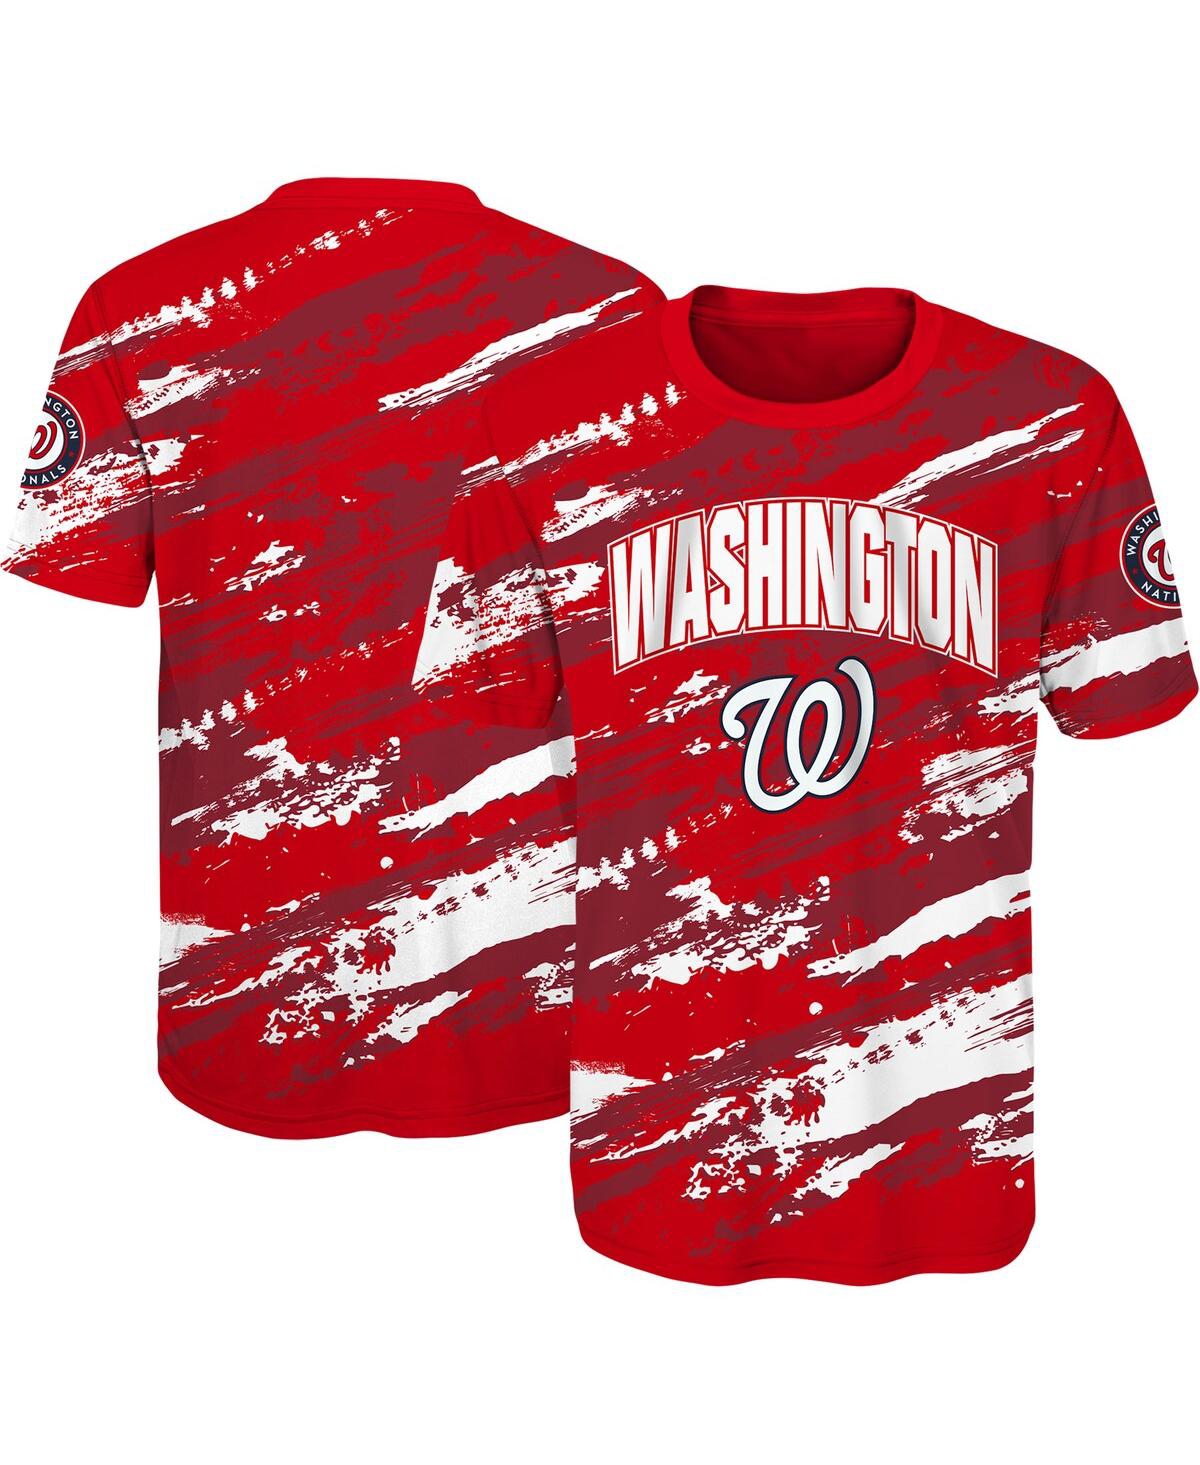 Outerstuff Kids' Big Boys And Girls Red Washington Nationals Stealing Home T-shirt